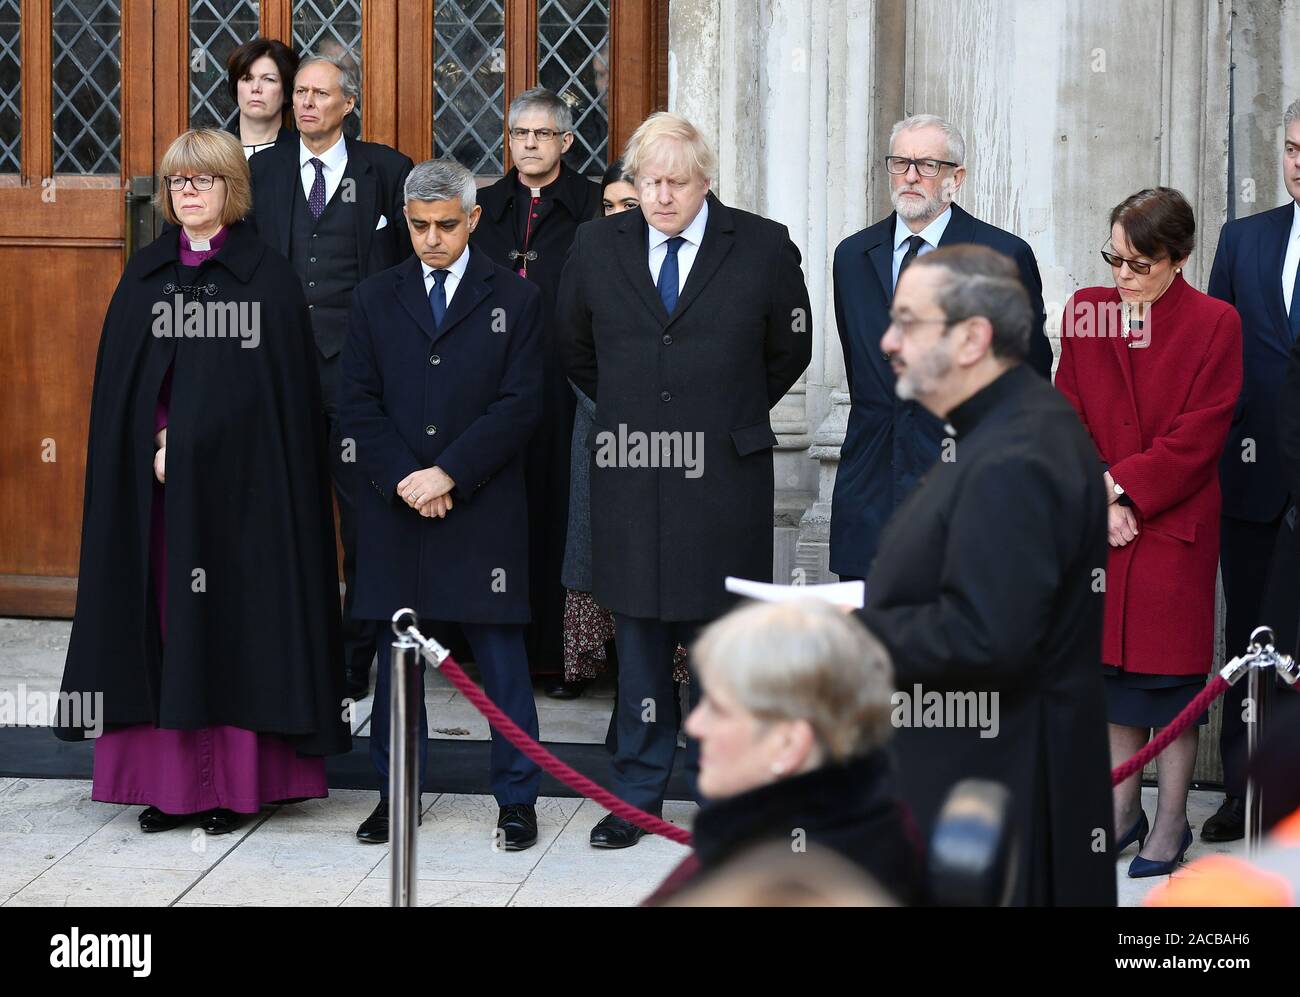 Mayor of London Sadiq Khan (front row 2nd left), Prime Minister Boris Johnson (centre) and Labour leader Jeremy Corbyn (3rd right) take part in a vigil in Guildhall Yard, London, to honour the victims off the London Bridge terror attack, as well as the members of the public and emergency services who risked their lives to help others after a terrorist wearing a fake suicide vest went on a knife rampage killing two people, was shot dead by police on Friday. Stock Photo